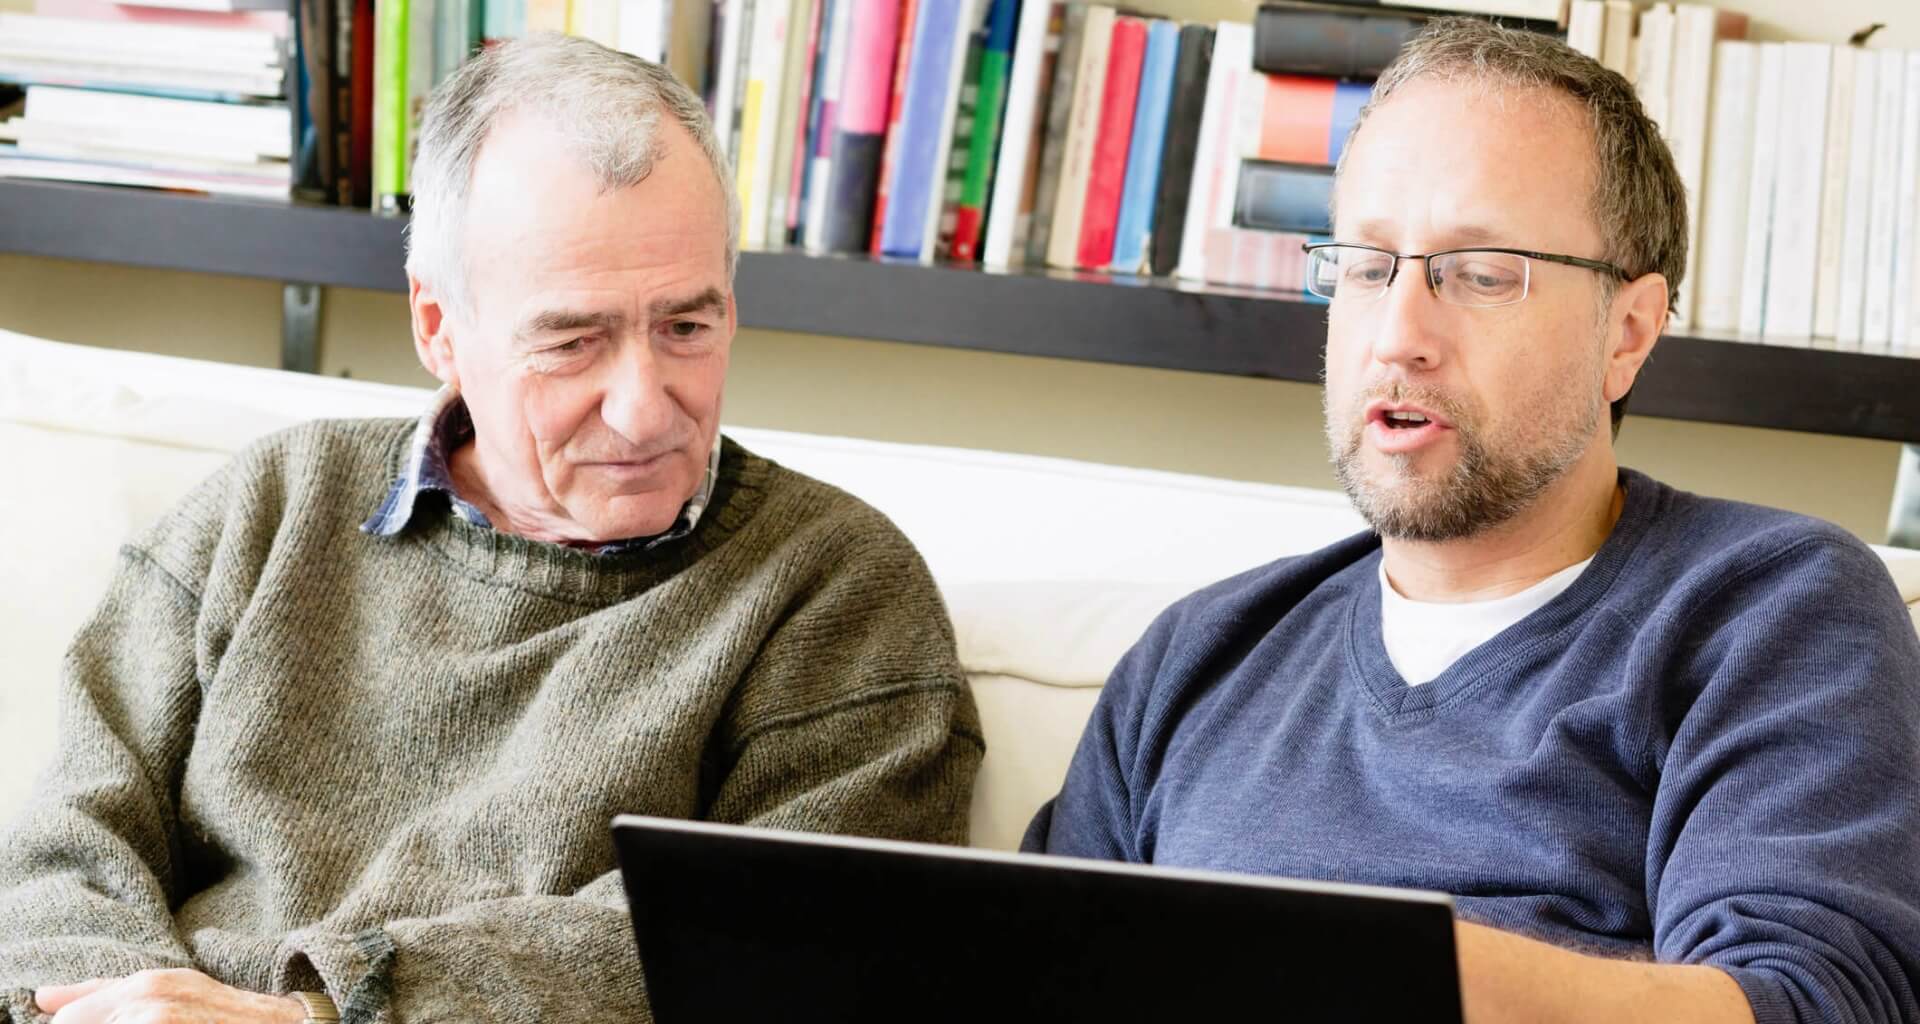 son showing older father how to use laptop